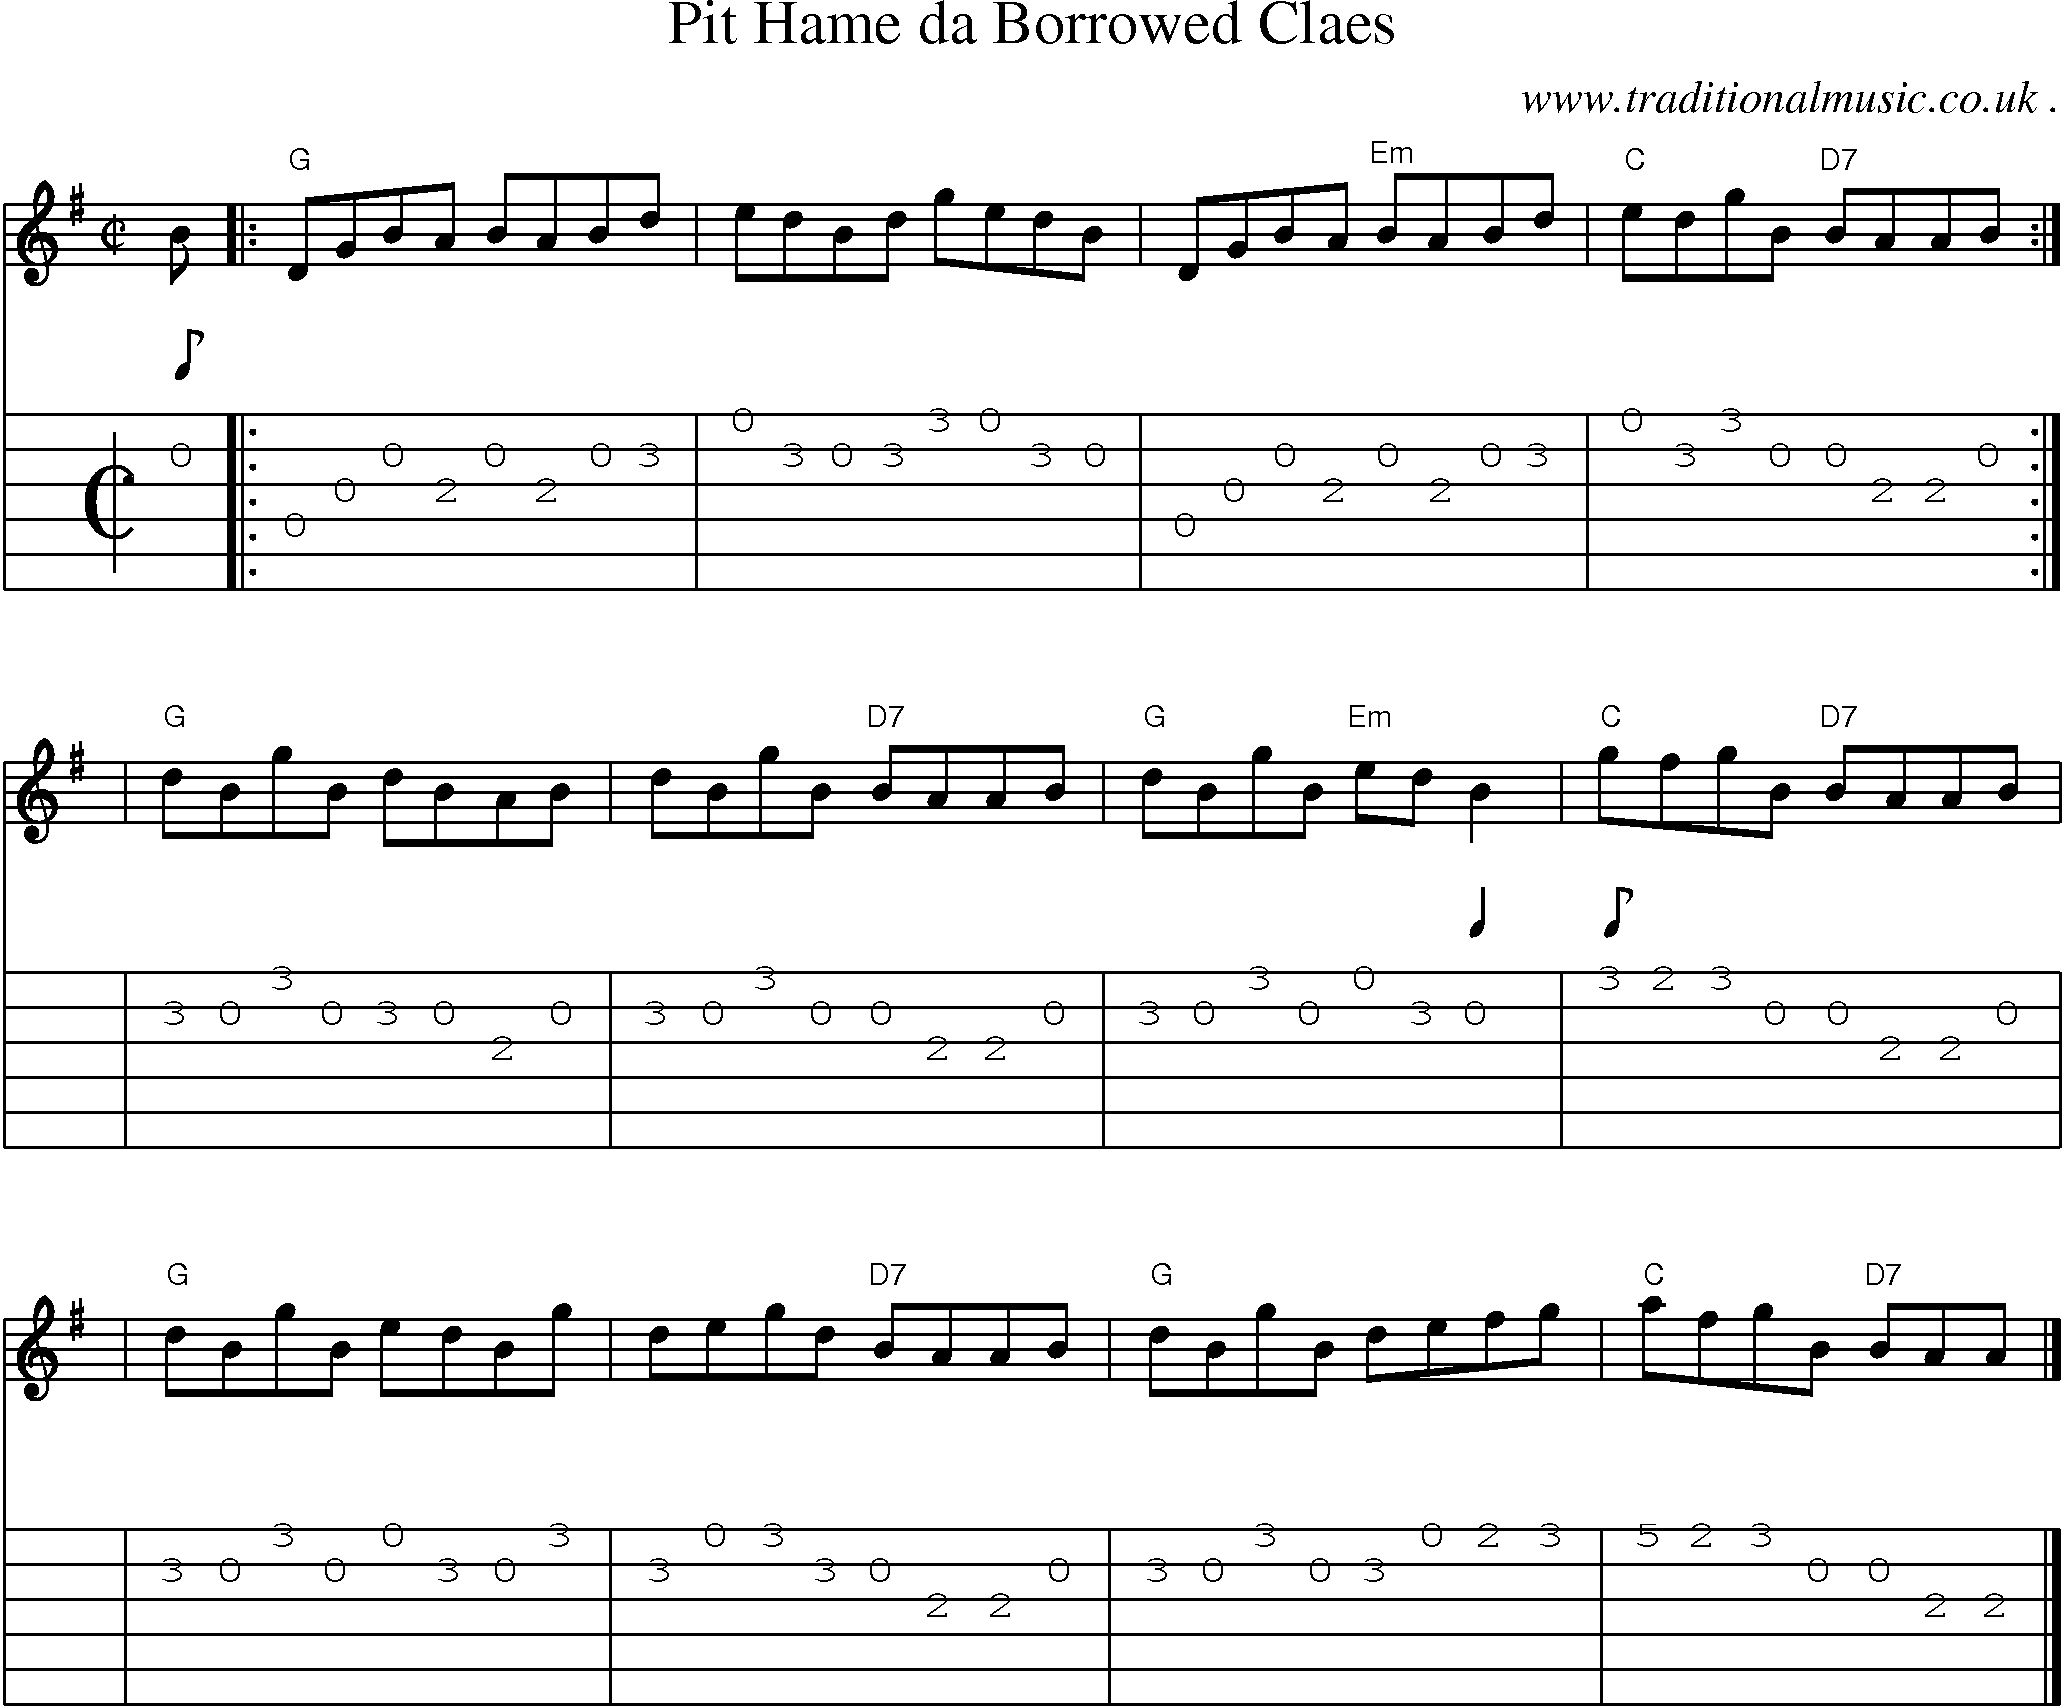 Sheet-music  score, Chords and Guitar Tabs for Pit Hame Da Borrowed Claes